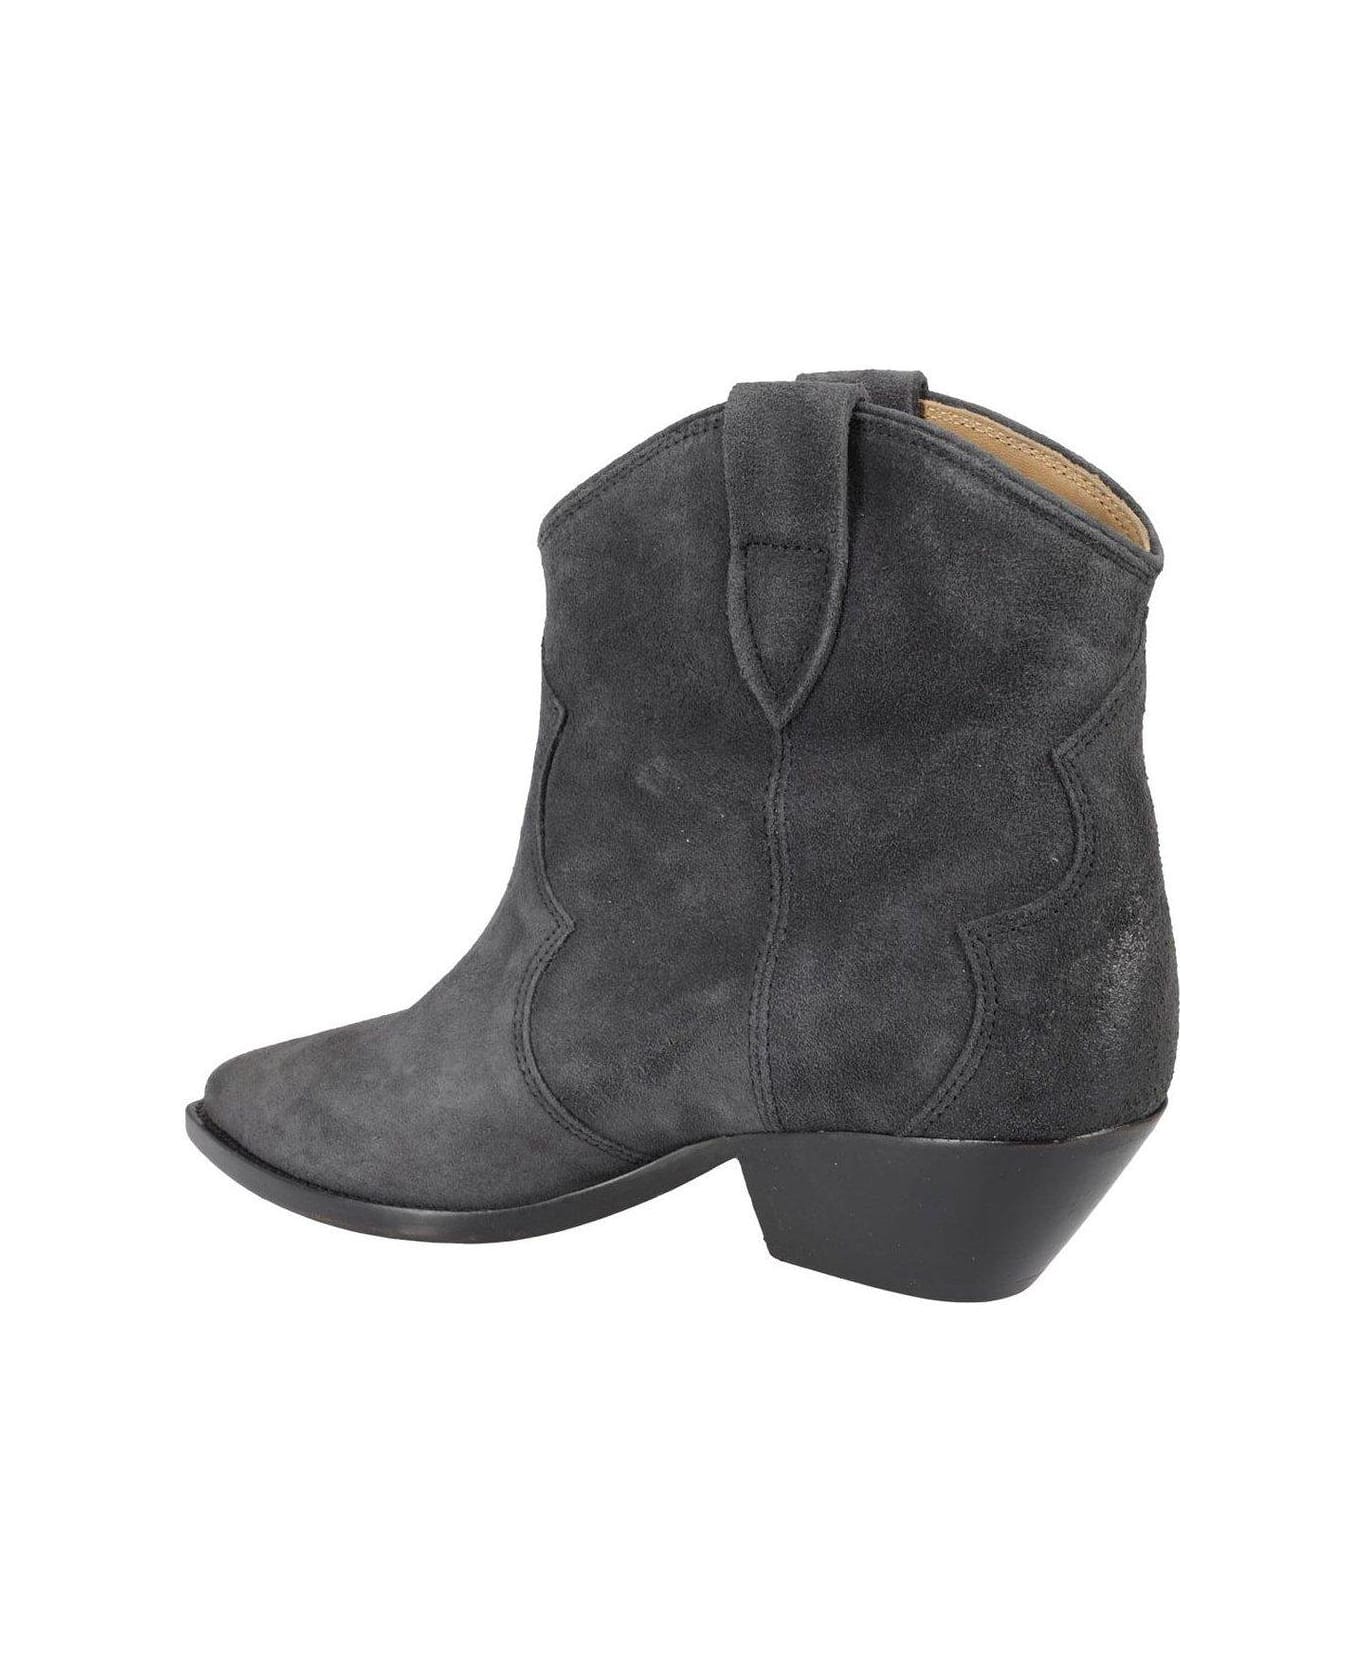 Isabel Marant Pointed Toe Ankle Boots - Black